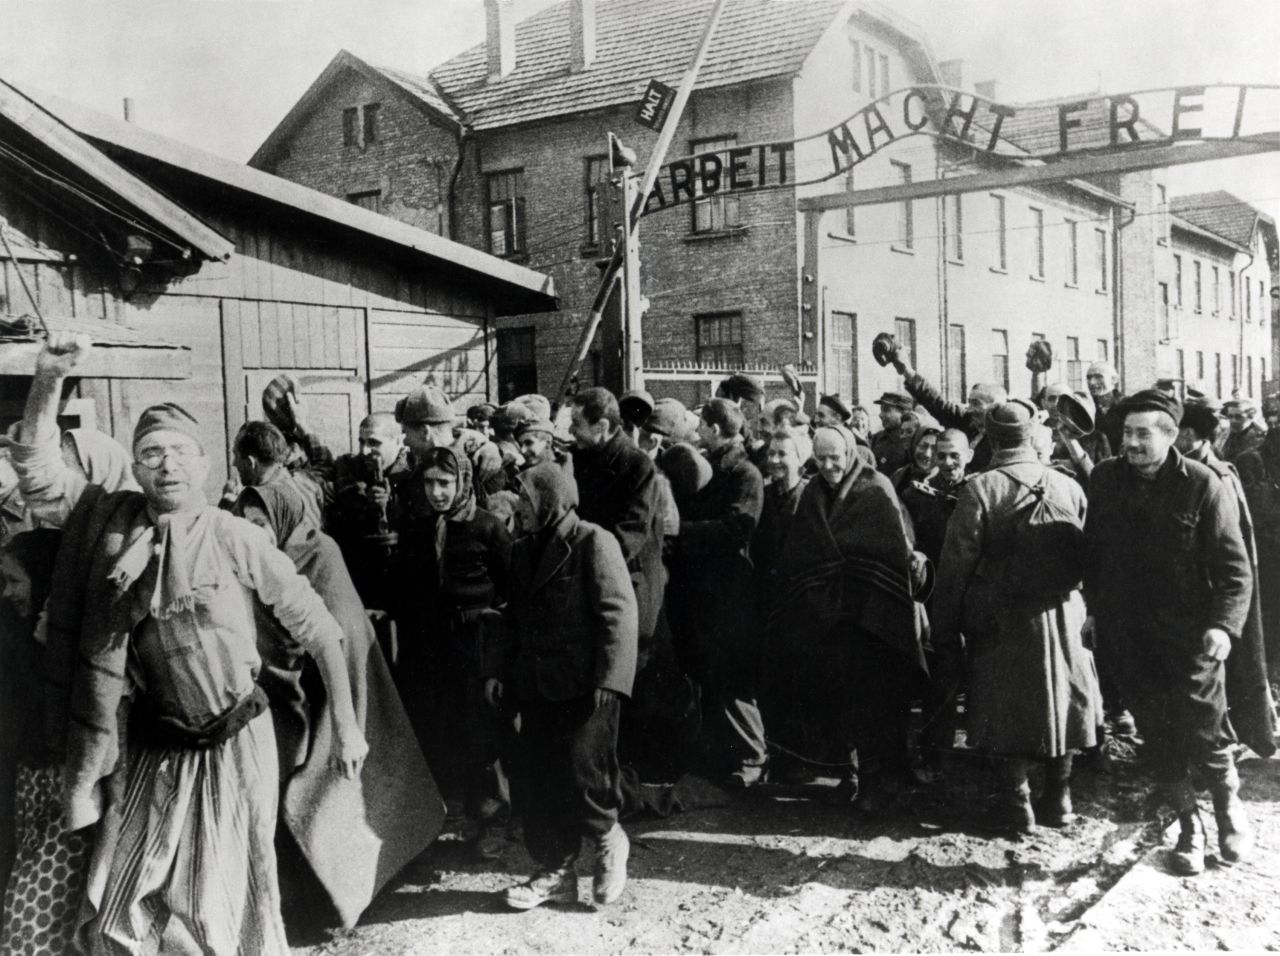 Survivors of Auschwitz leave the concentration camp at the end of World War II in February 1945. Above them is the German slogan "Arbeit macht frei," which translates to "Work sets you free."